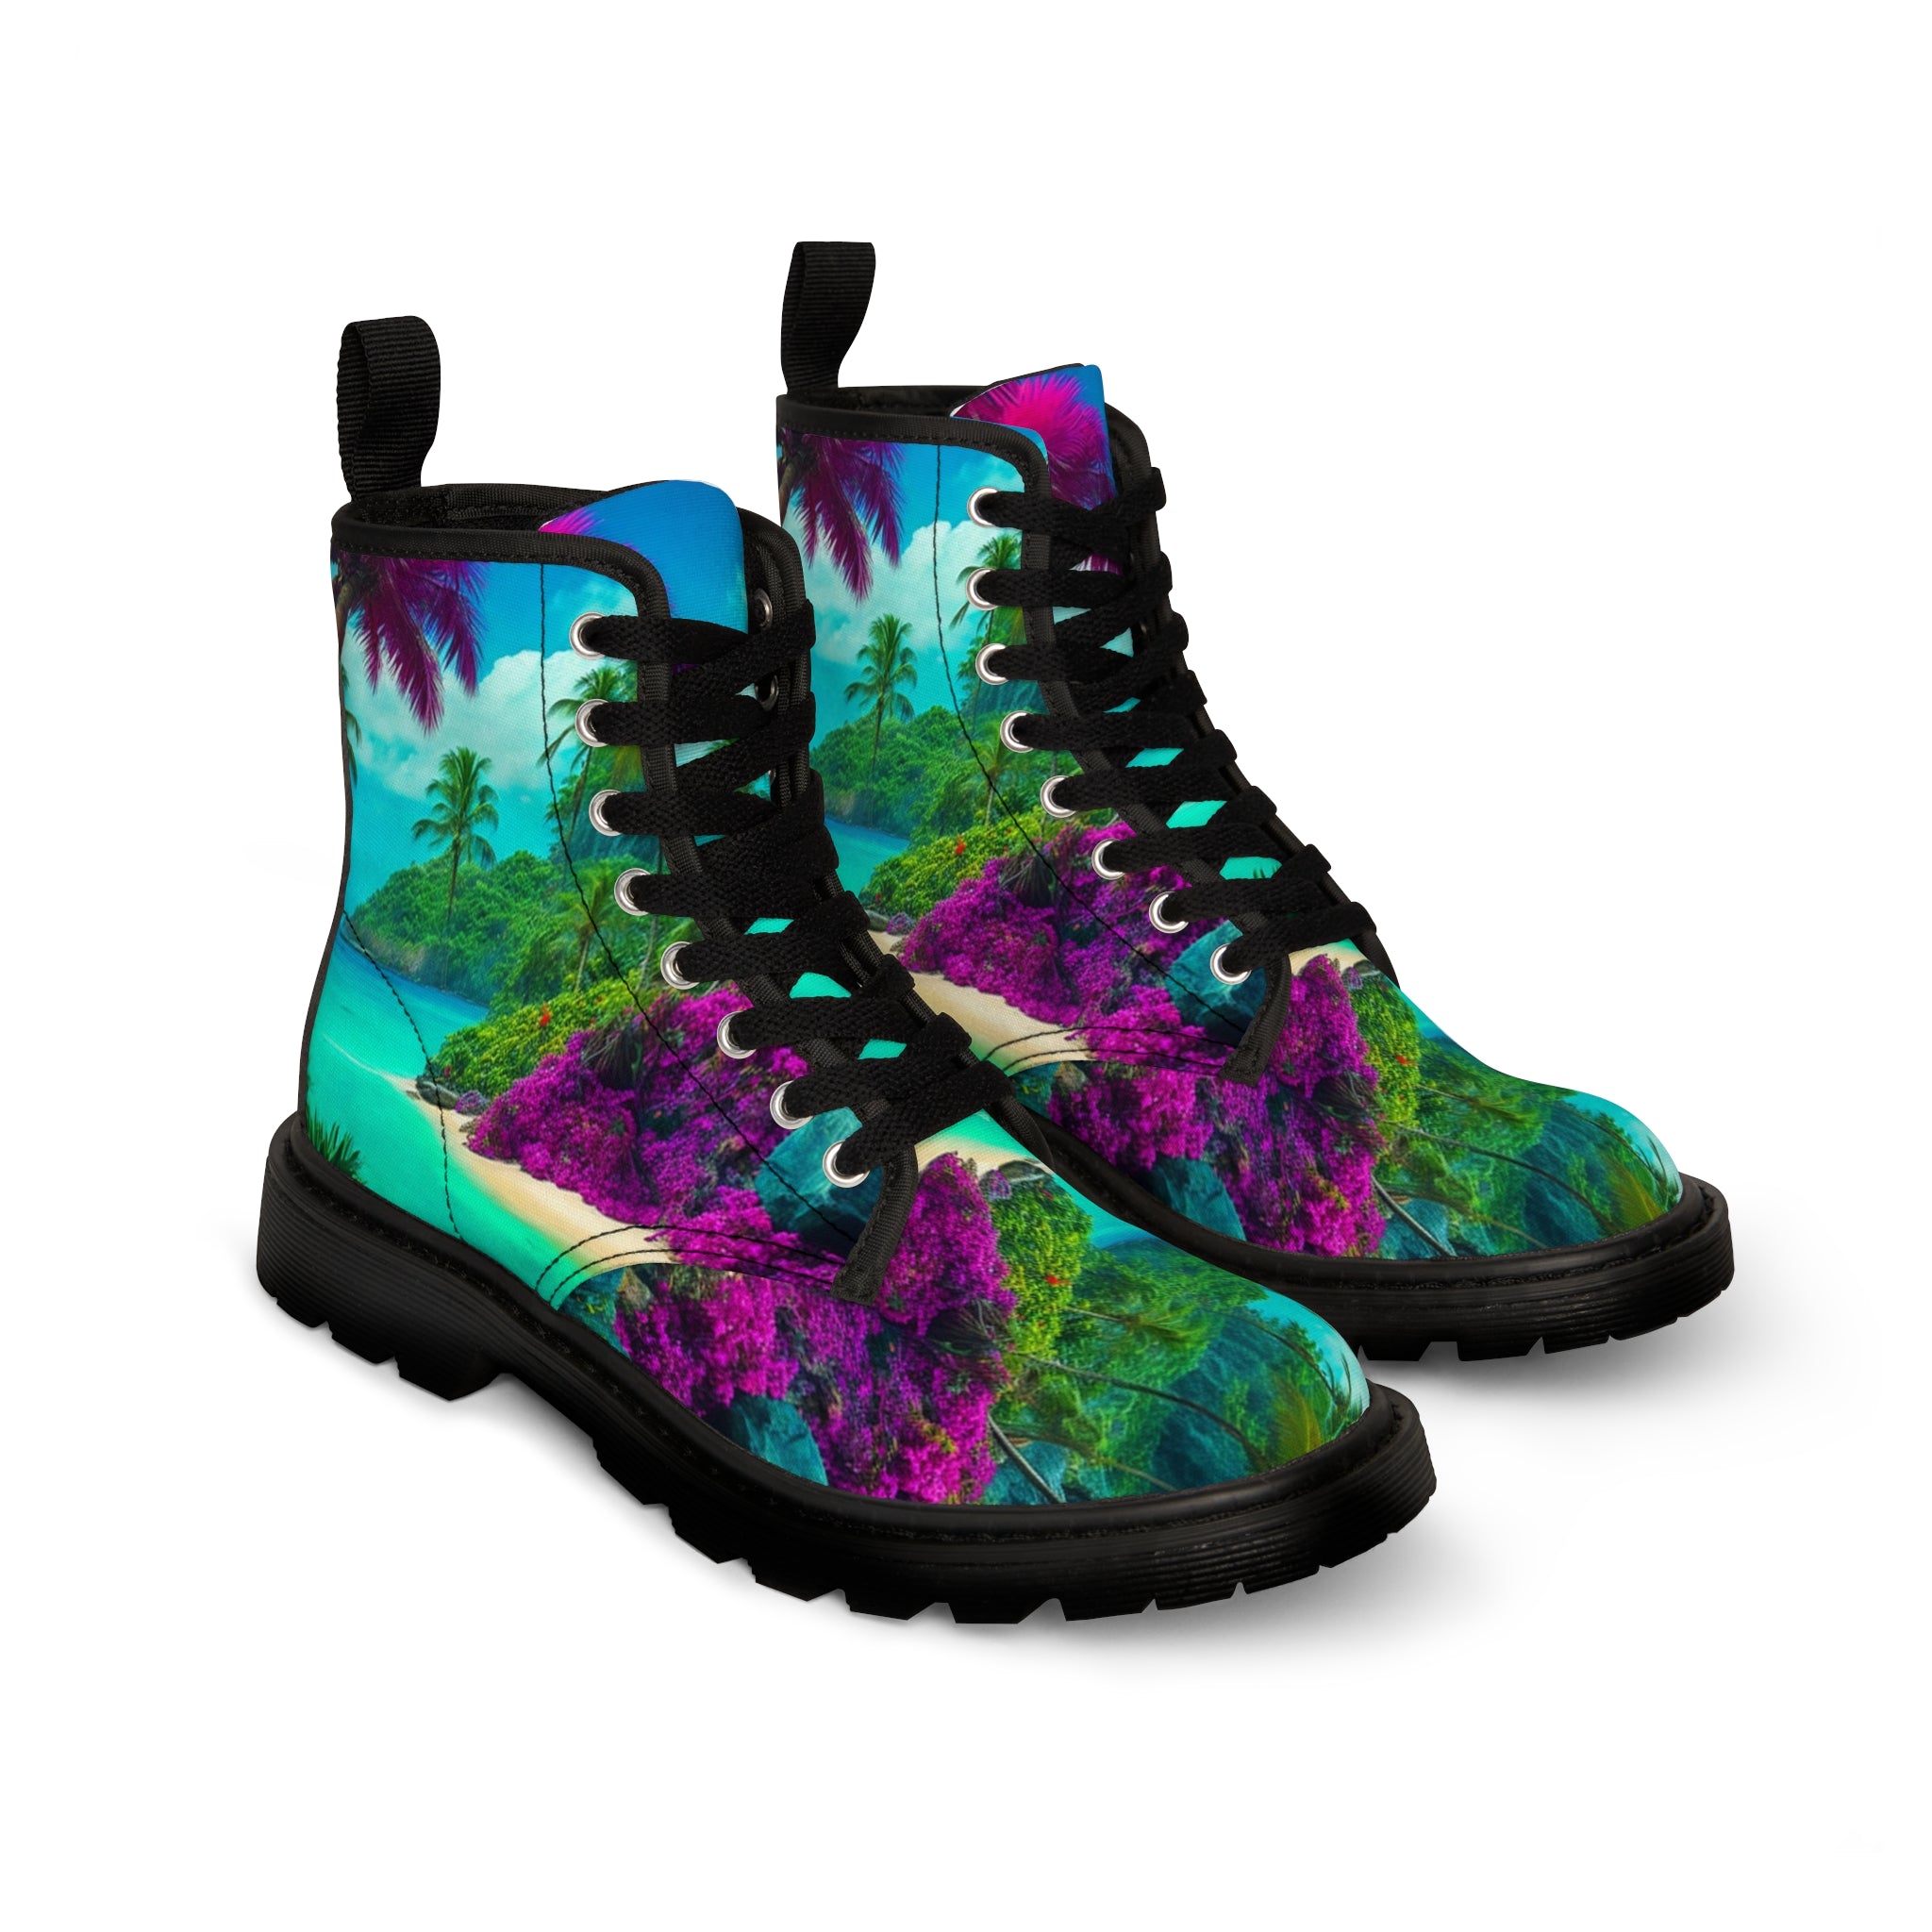 Customize Your Style with Women's Summer Vibes Boots